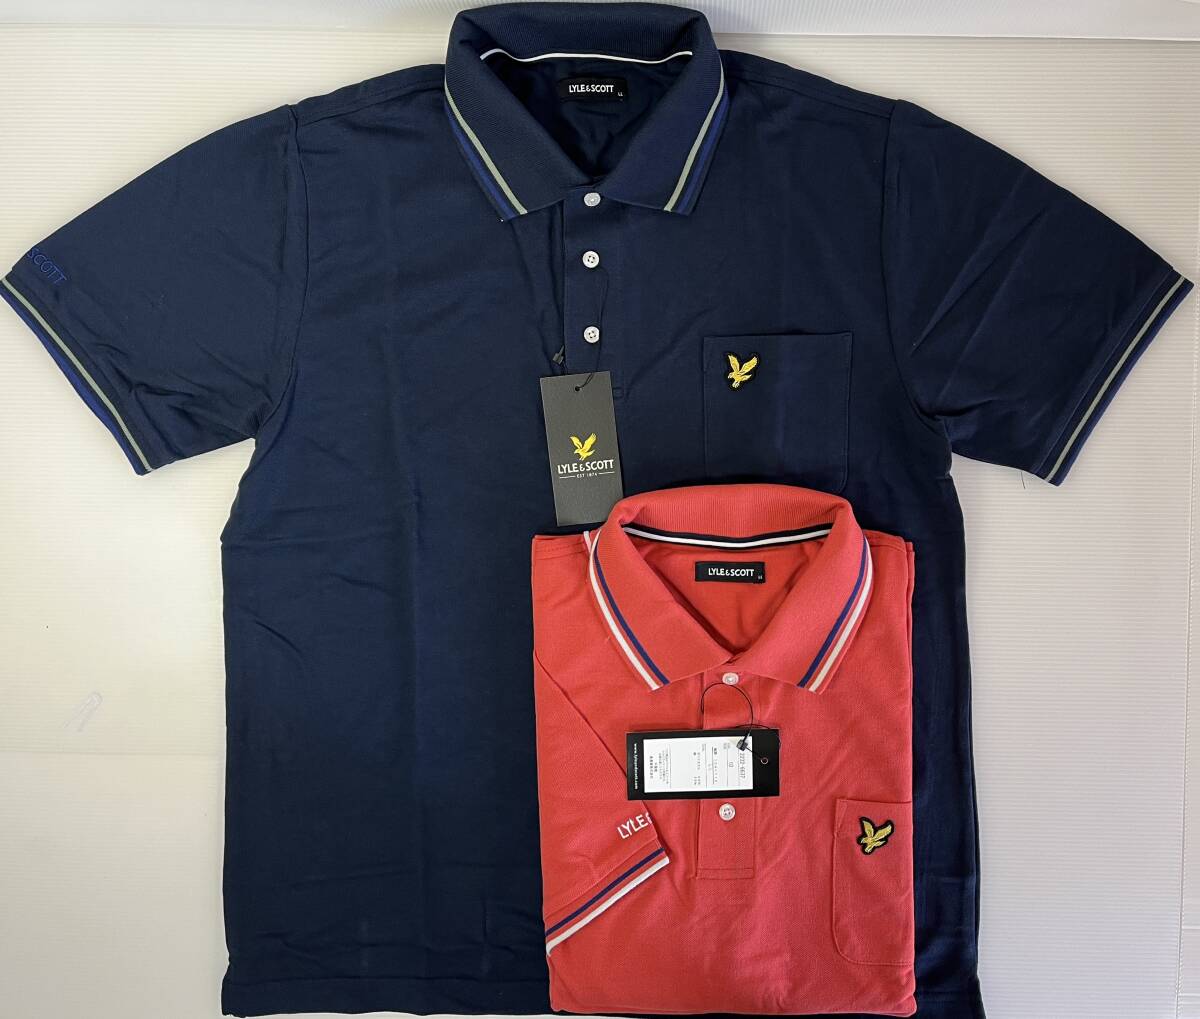 2 point together! new goods Lyle & Scott Golf wear polo-shirt with short sleeves 2232-6637 LL size 